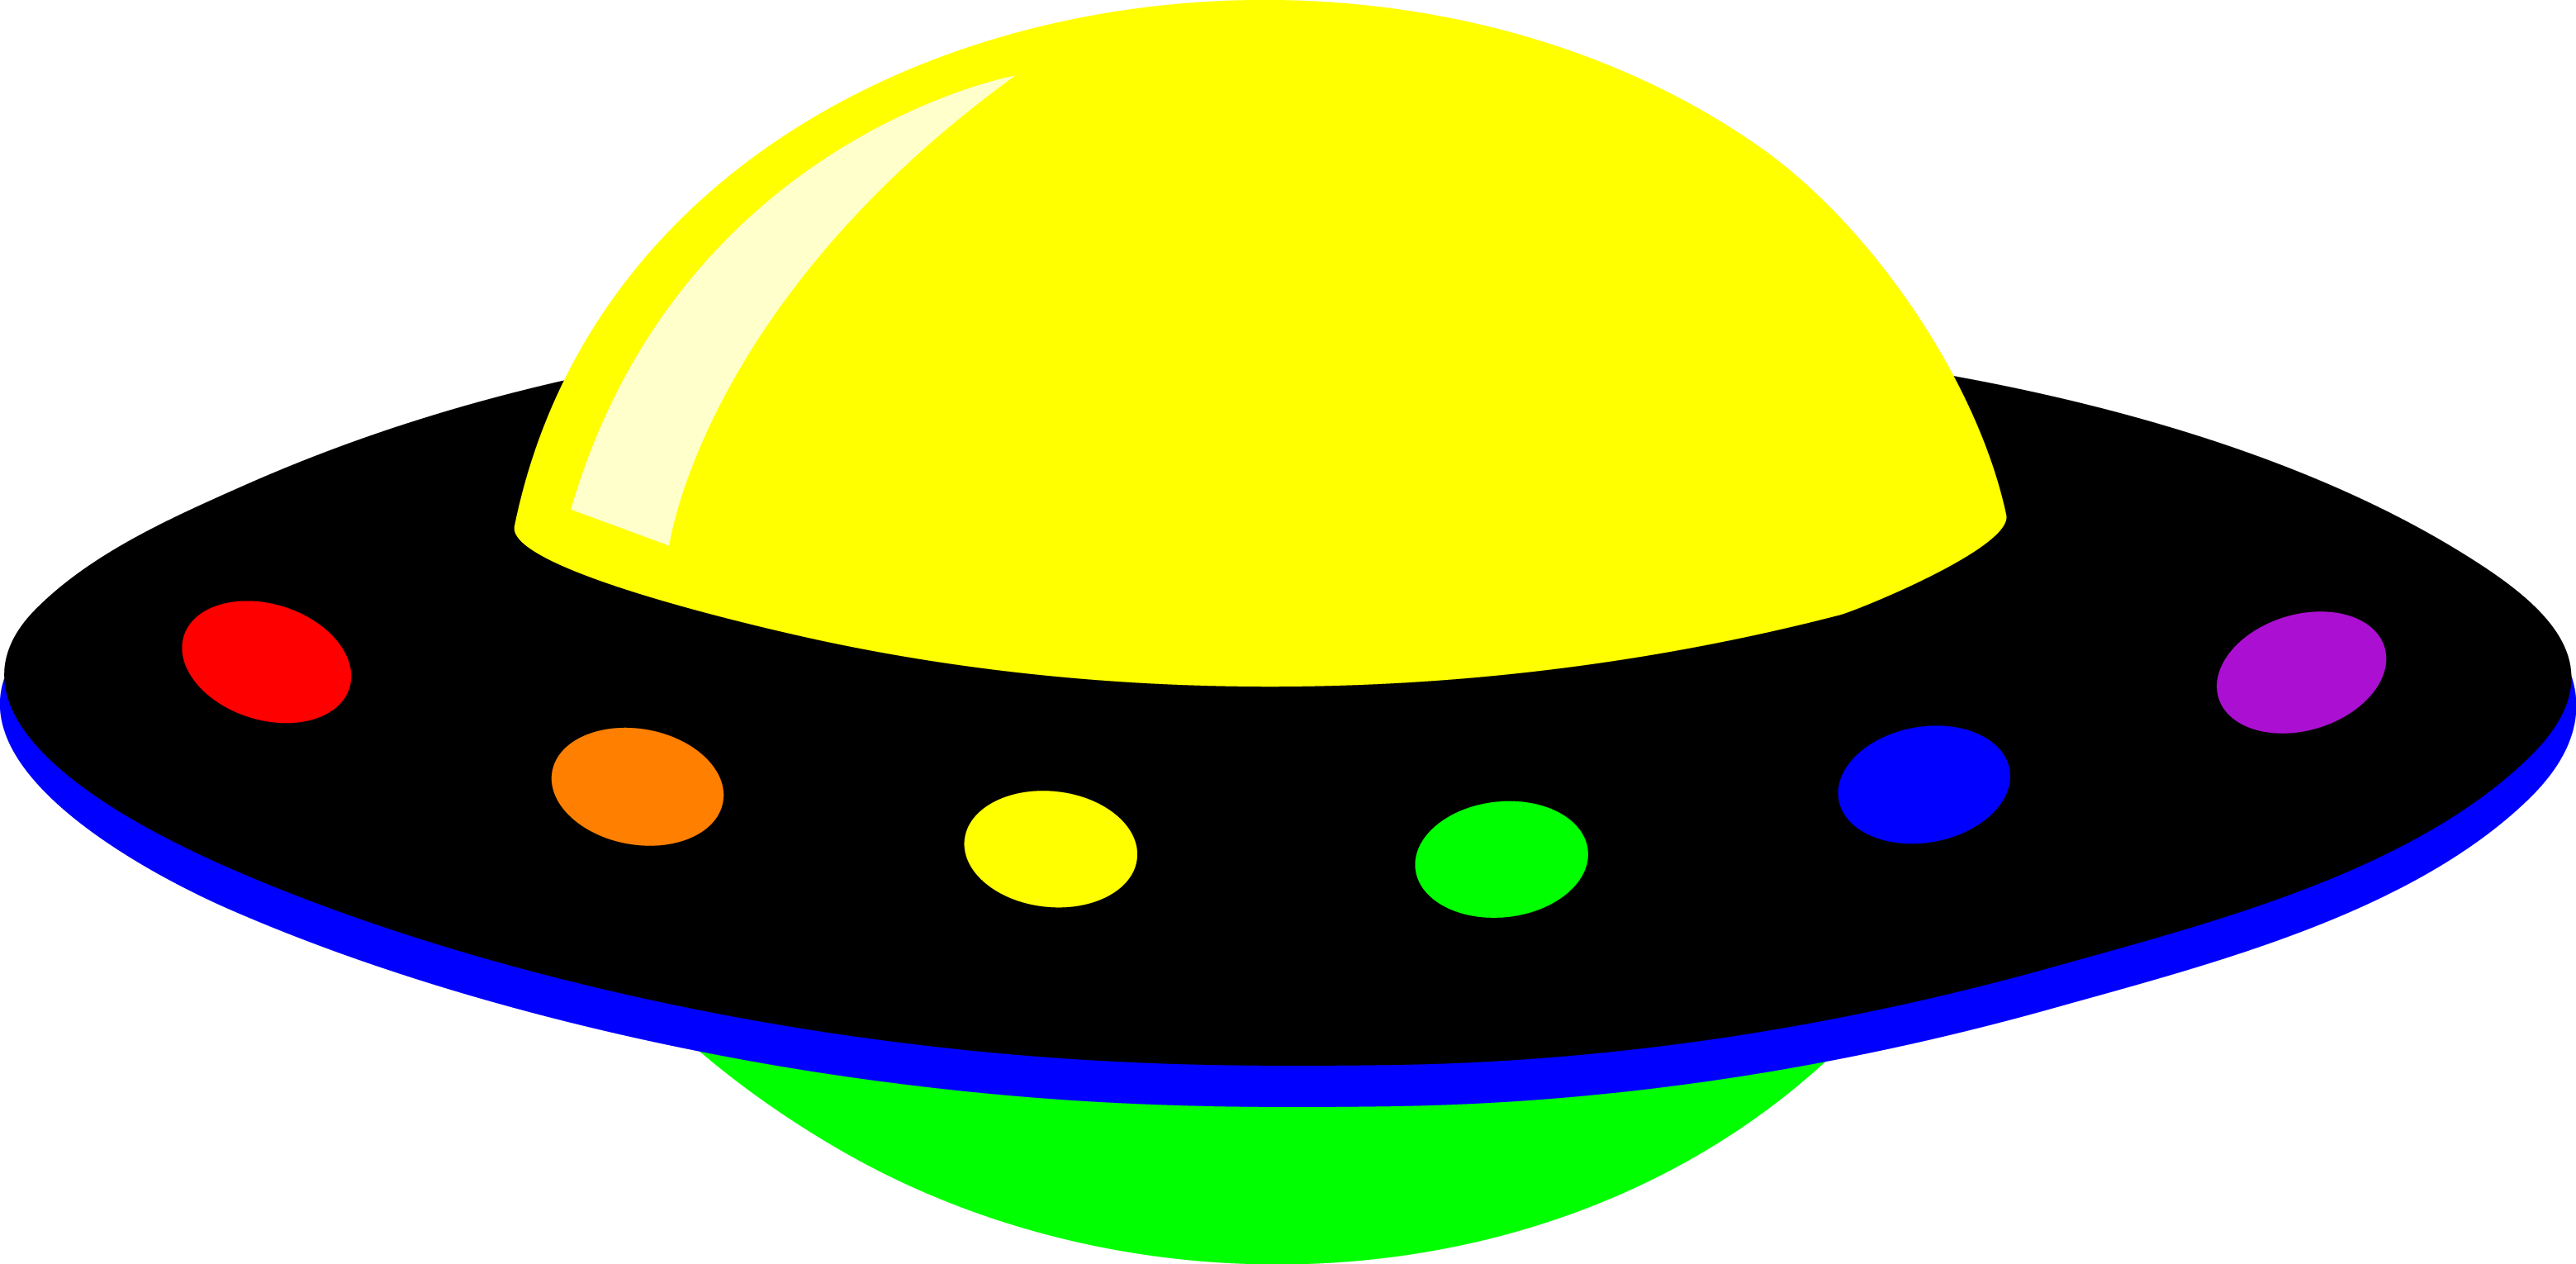 Cartoon Ufo | Outer Space Pictures - ClipArt Best - ClipArt Best